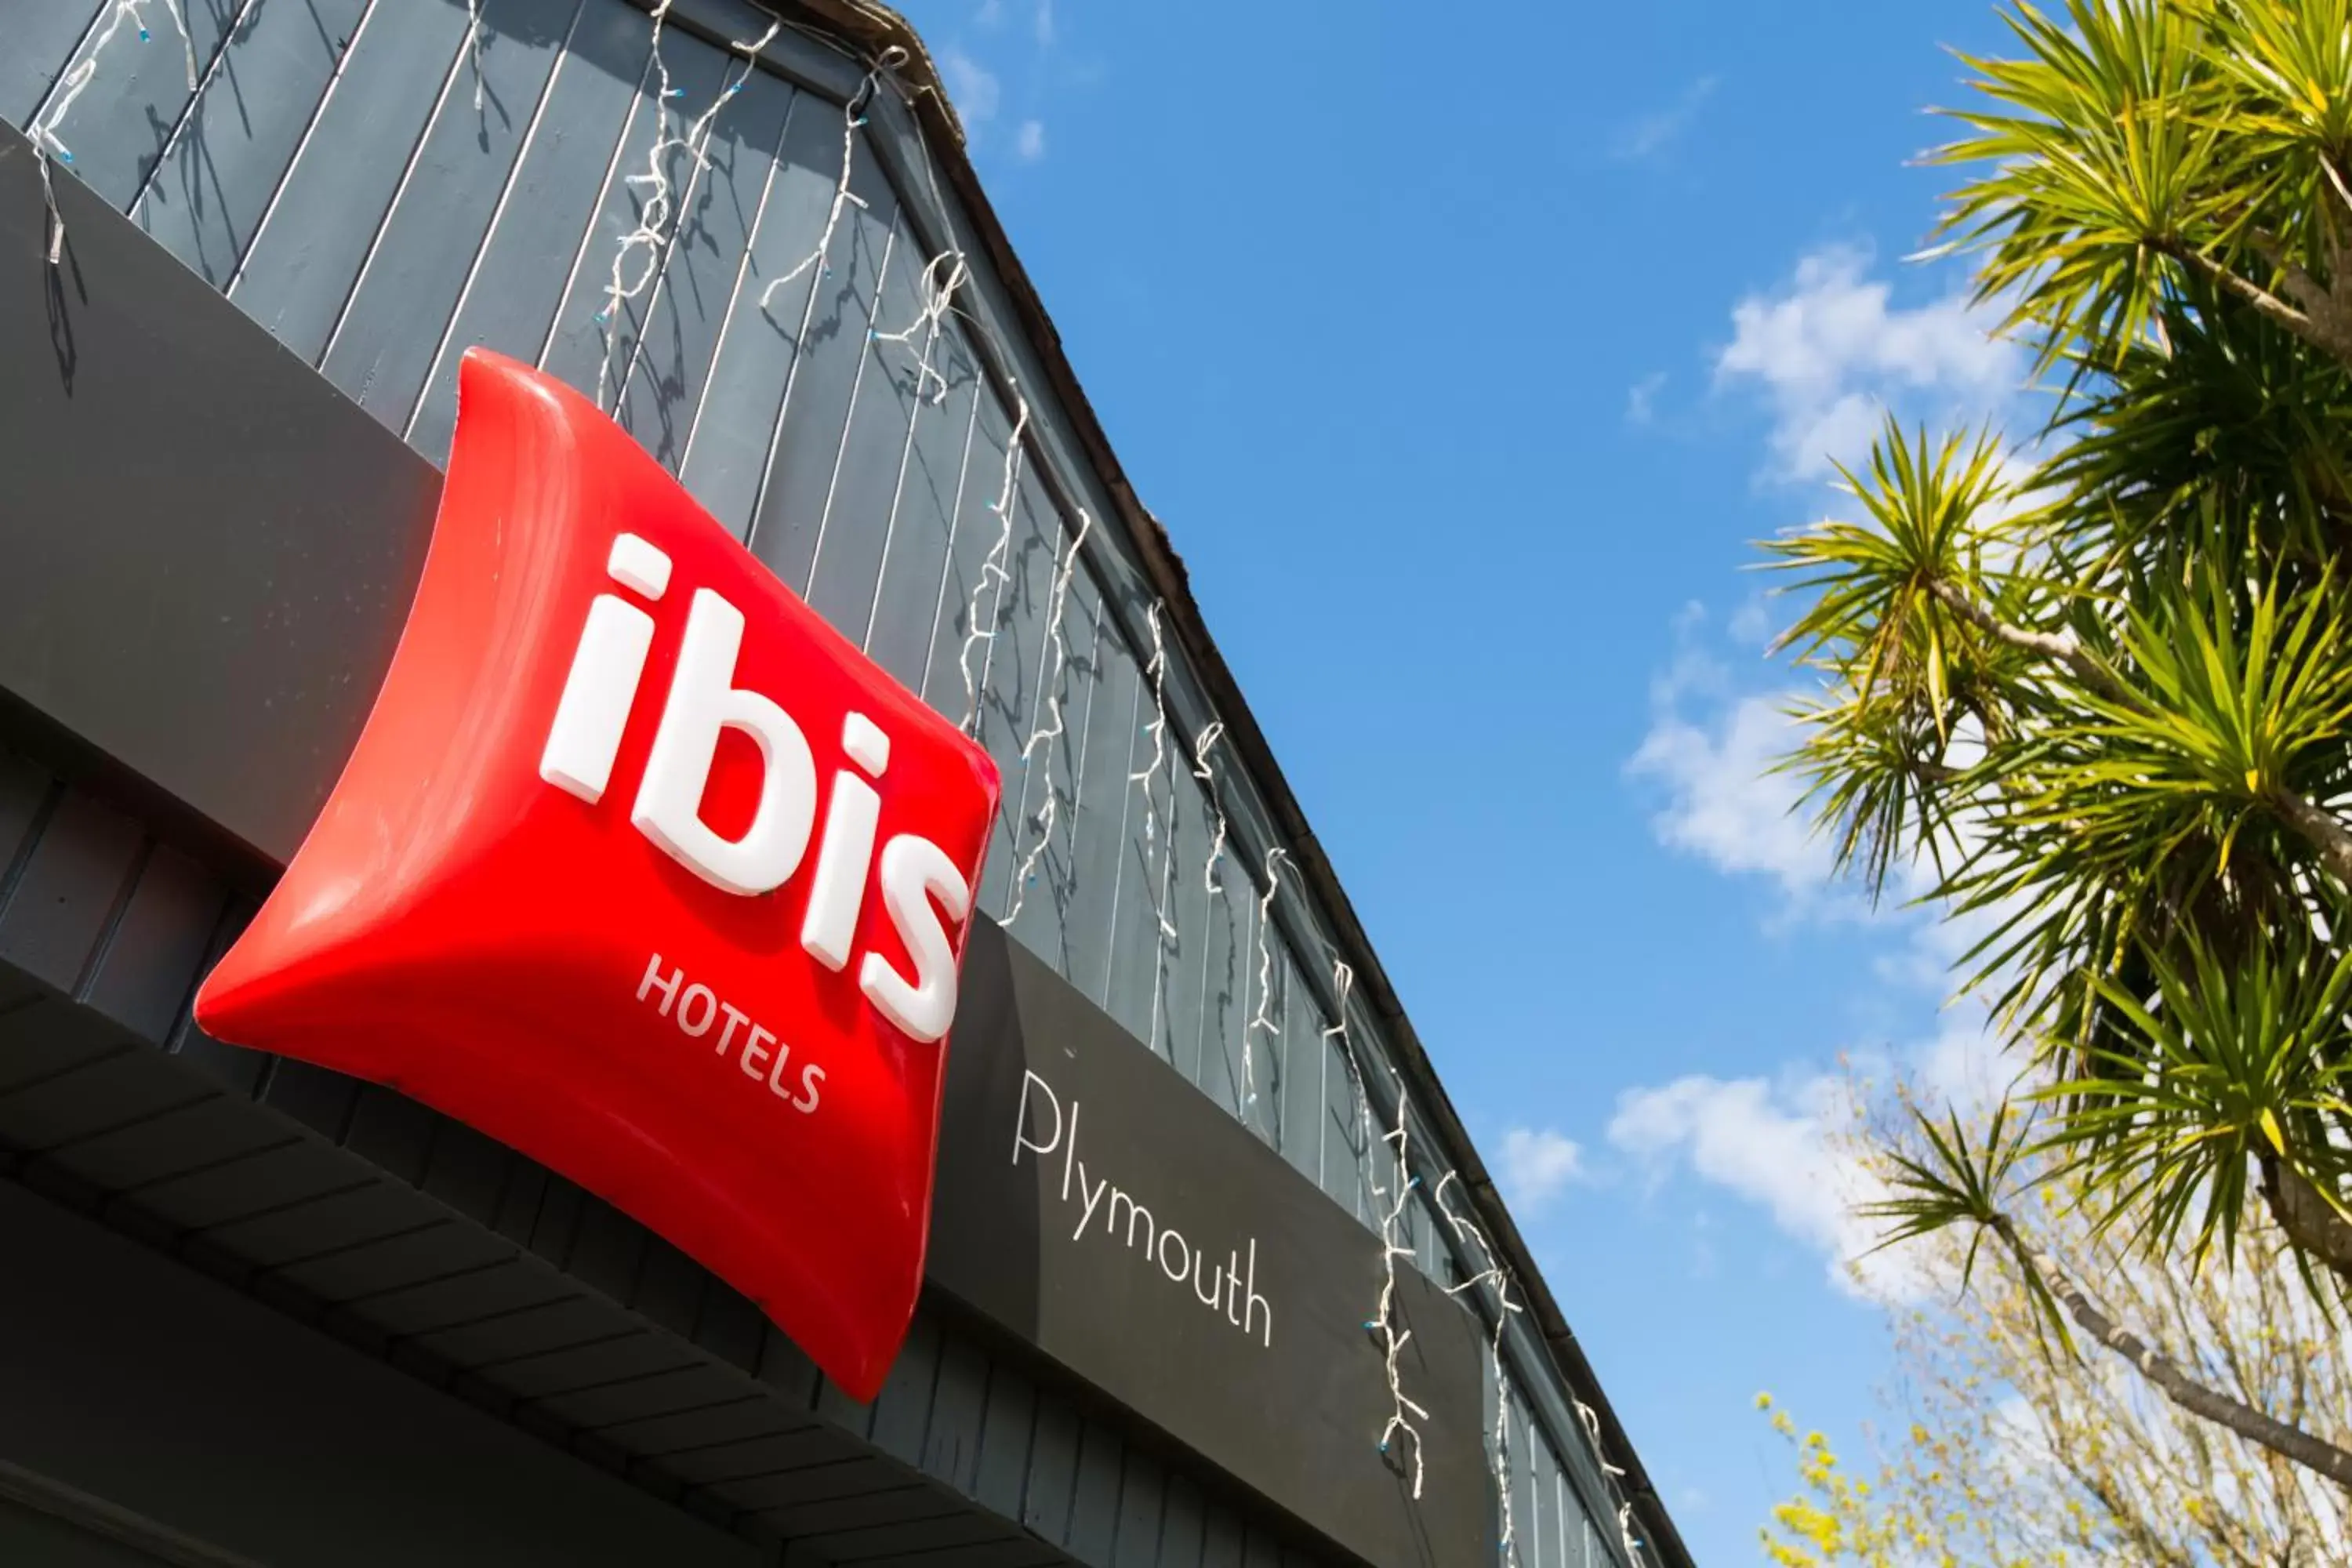 Property building in ibis Plymouth